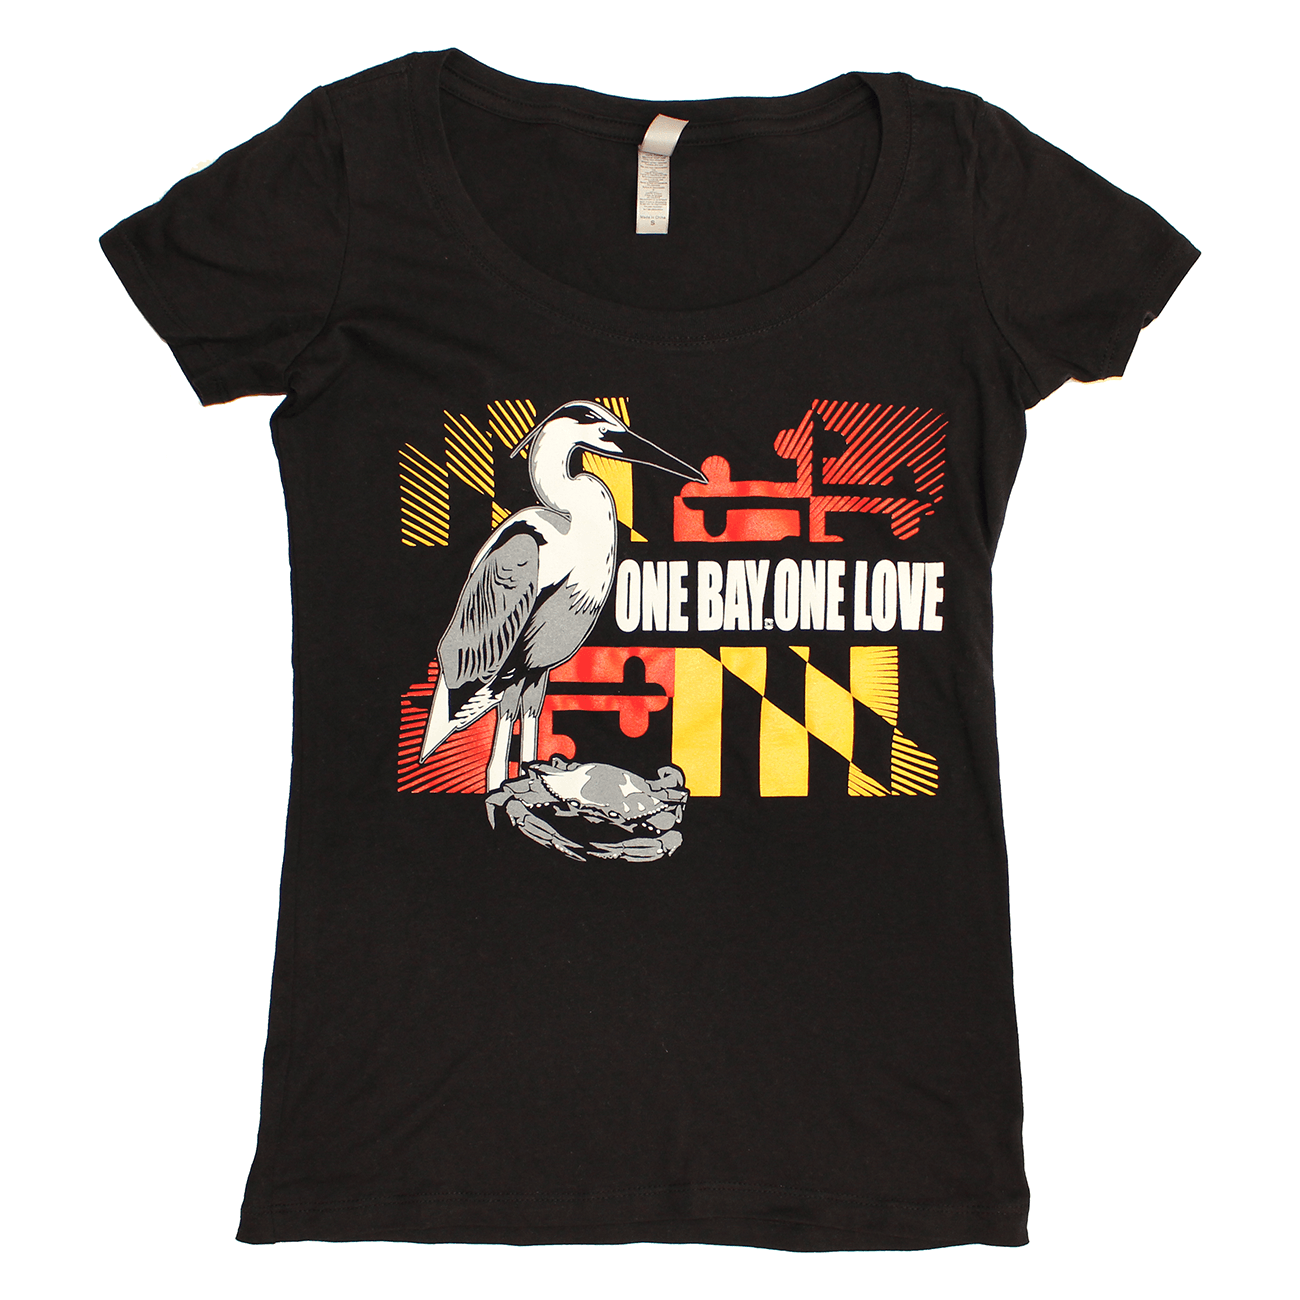 One Bay One Love (Black) / Ladies Scoop Neck Shirt - Route One Apparel